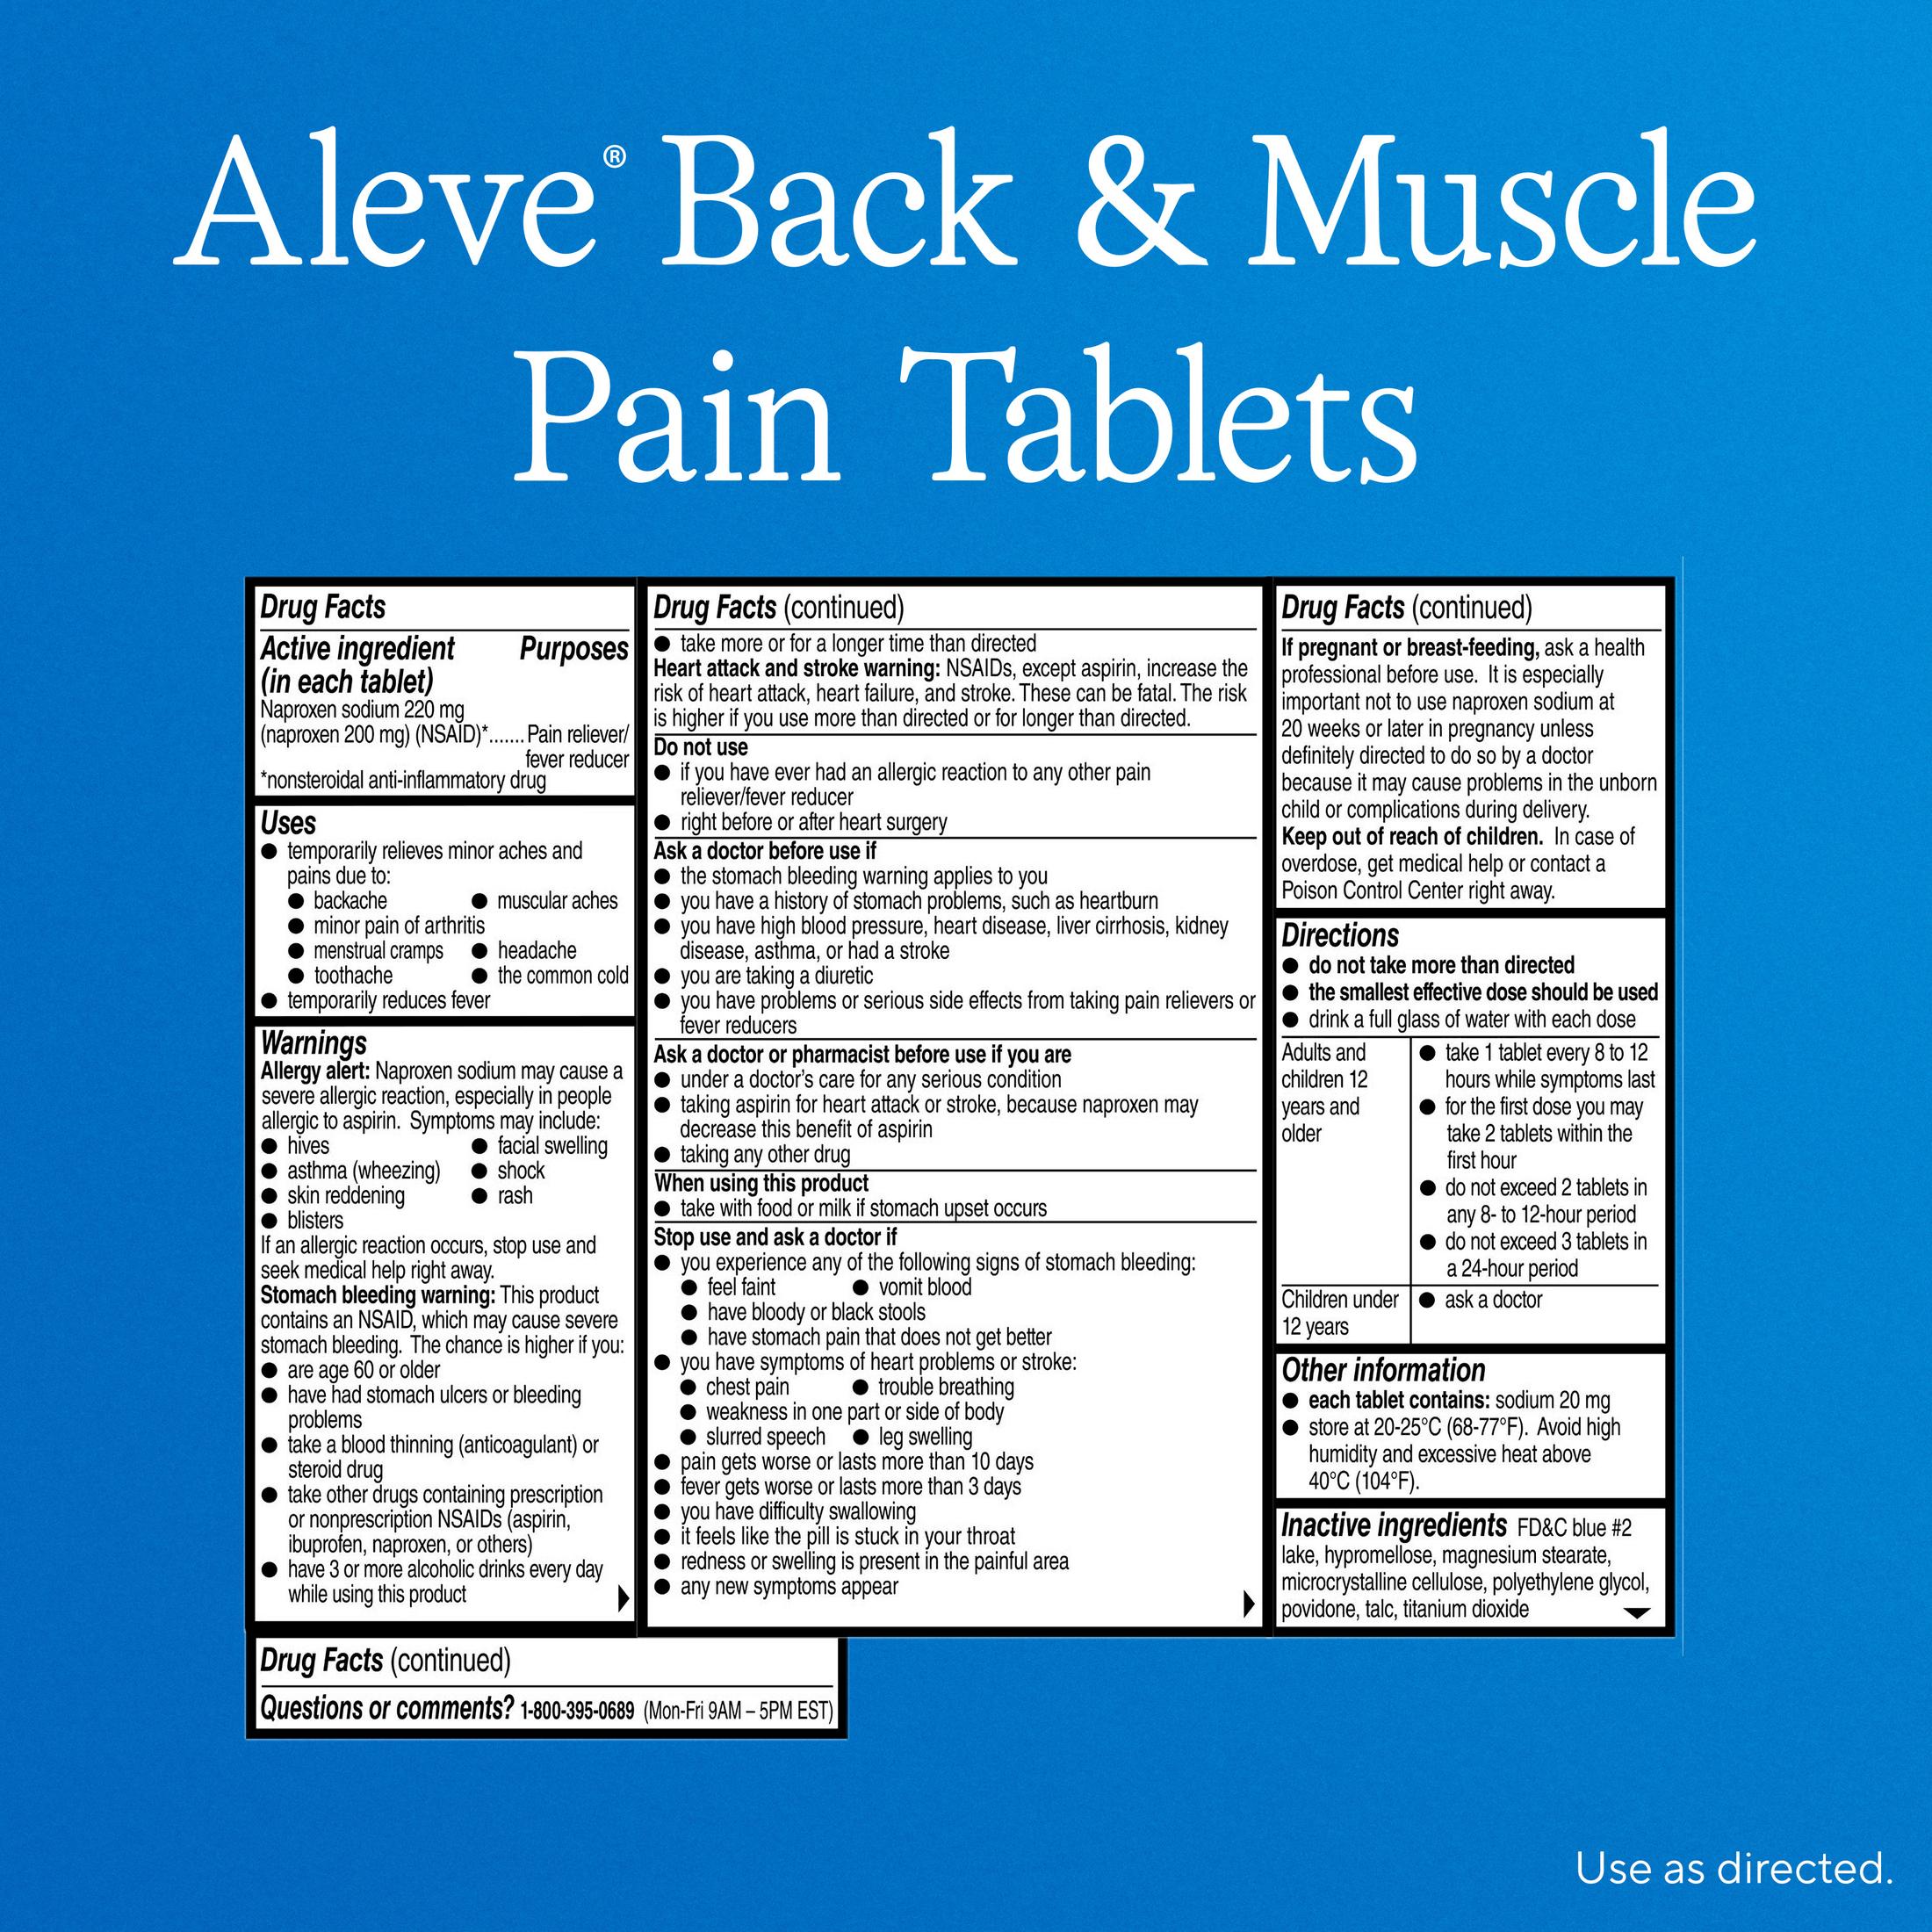 Aleve Back & Muscle Pain Reliever Naproxen Sodium Tablets, 50 Count - image 15 of 17